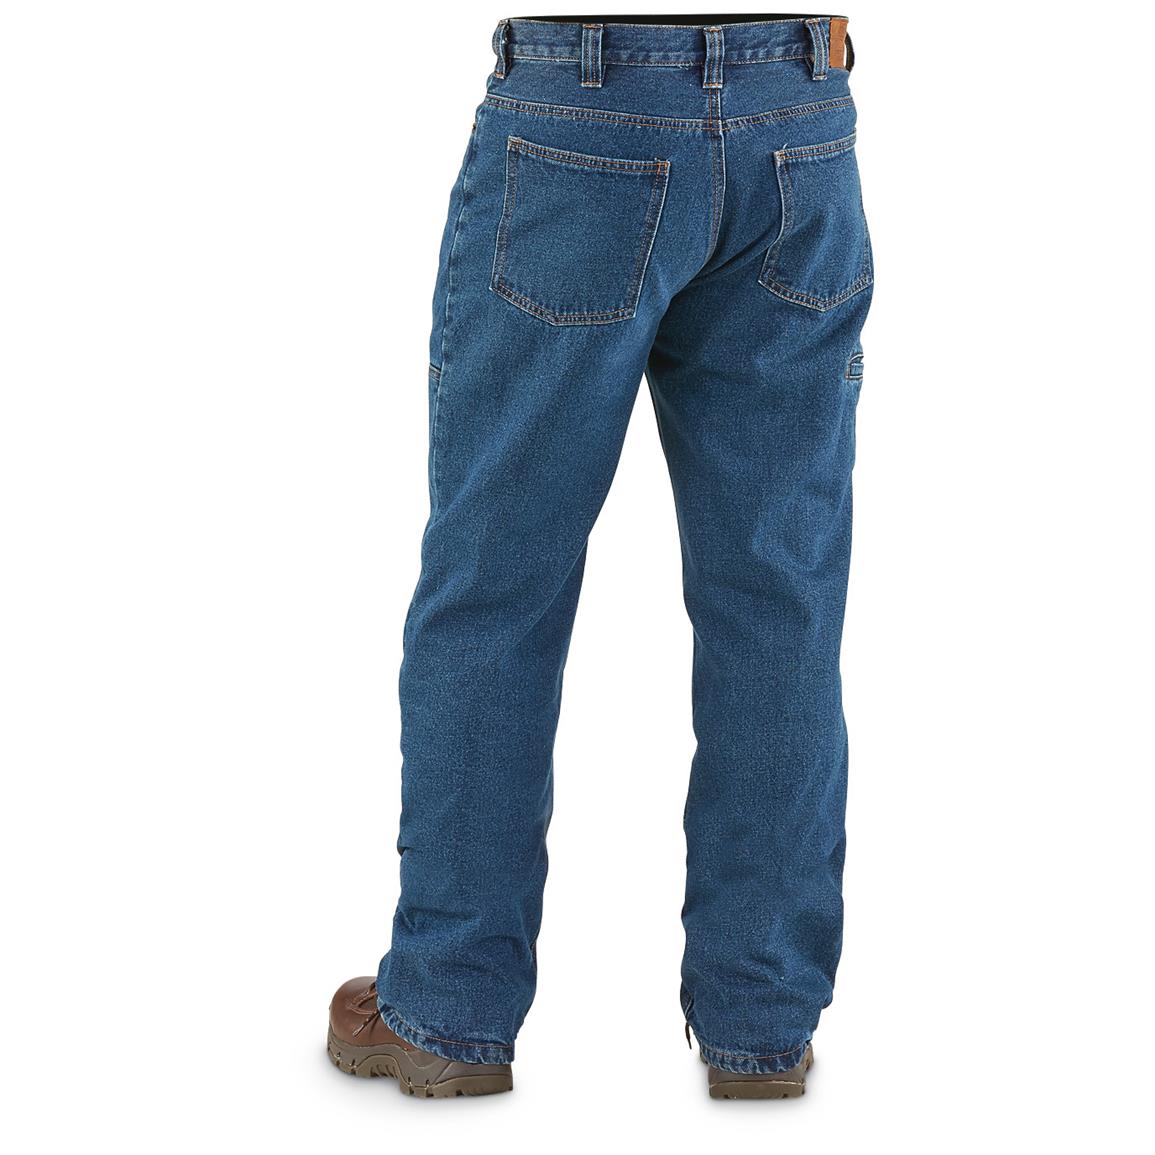 Workhorse Insulated Coveralls - 425109, Insulated Pants, Overalls ...